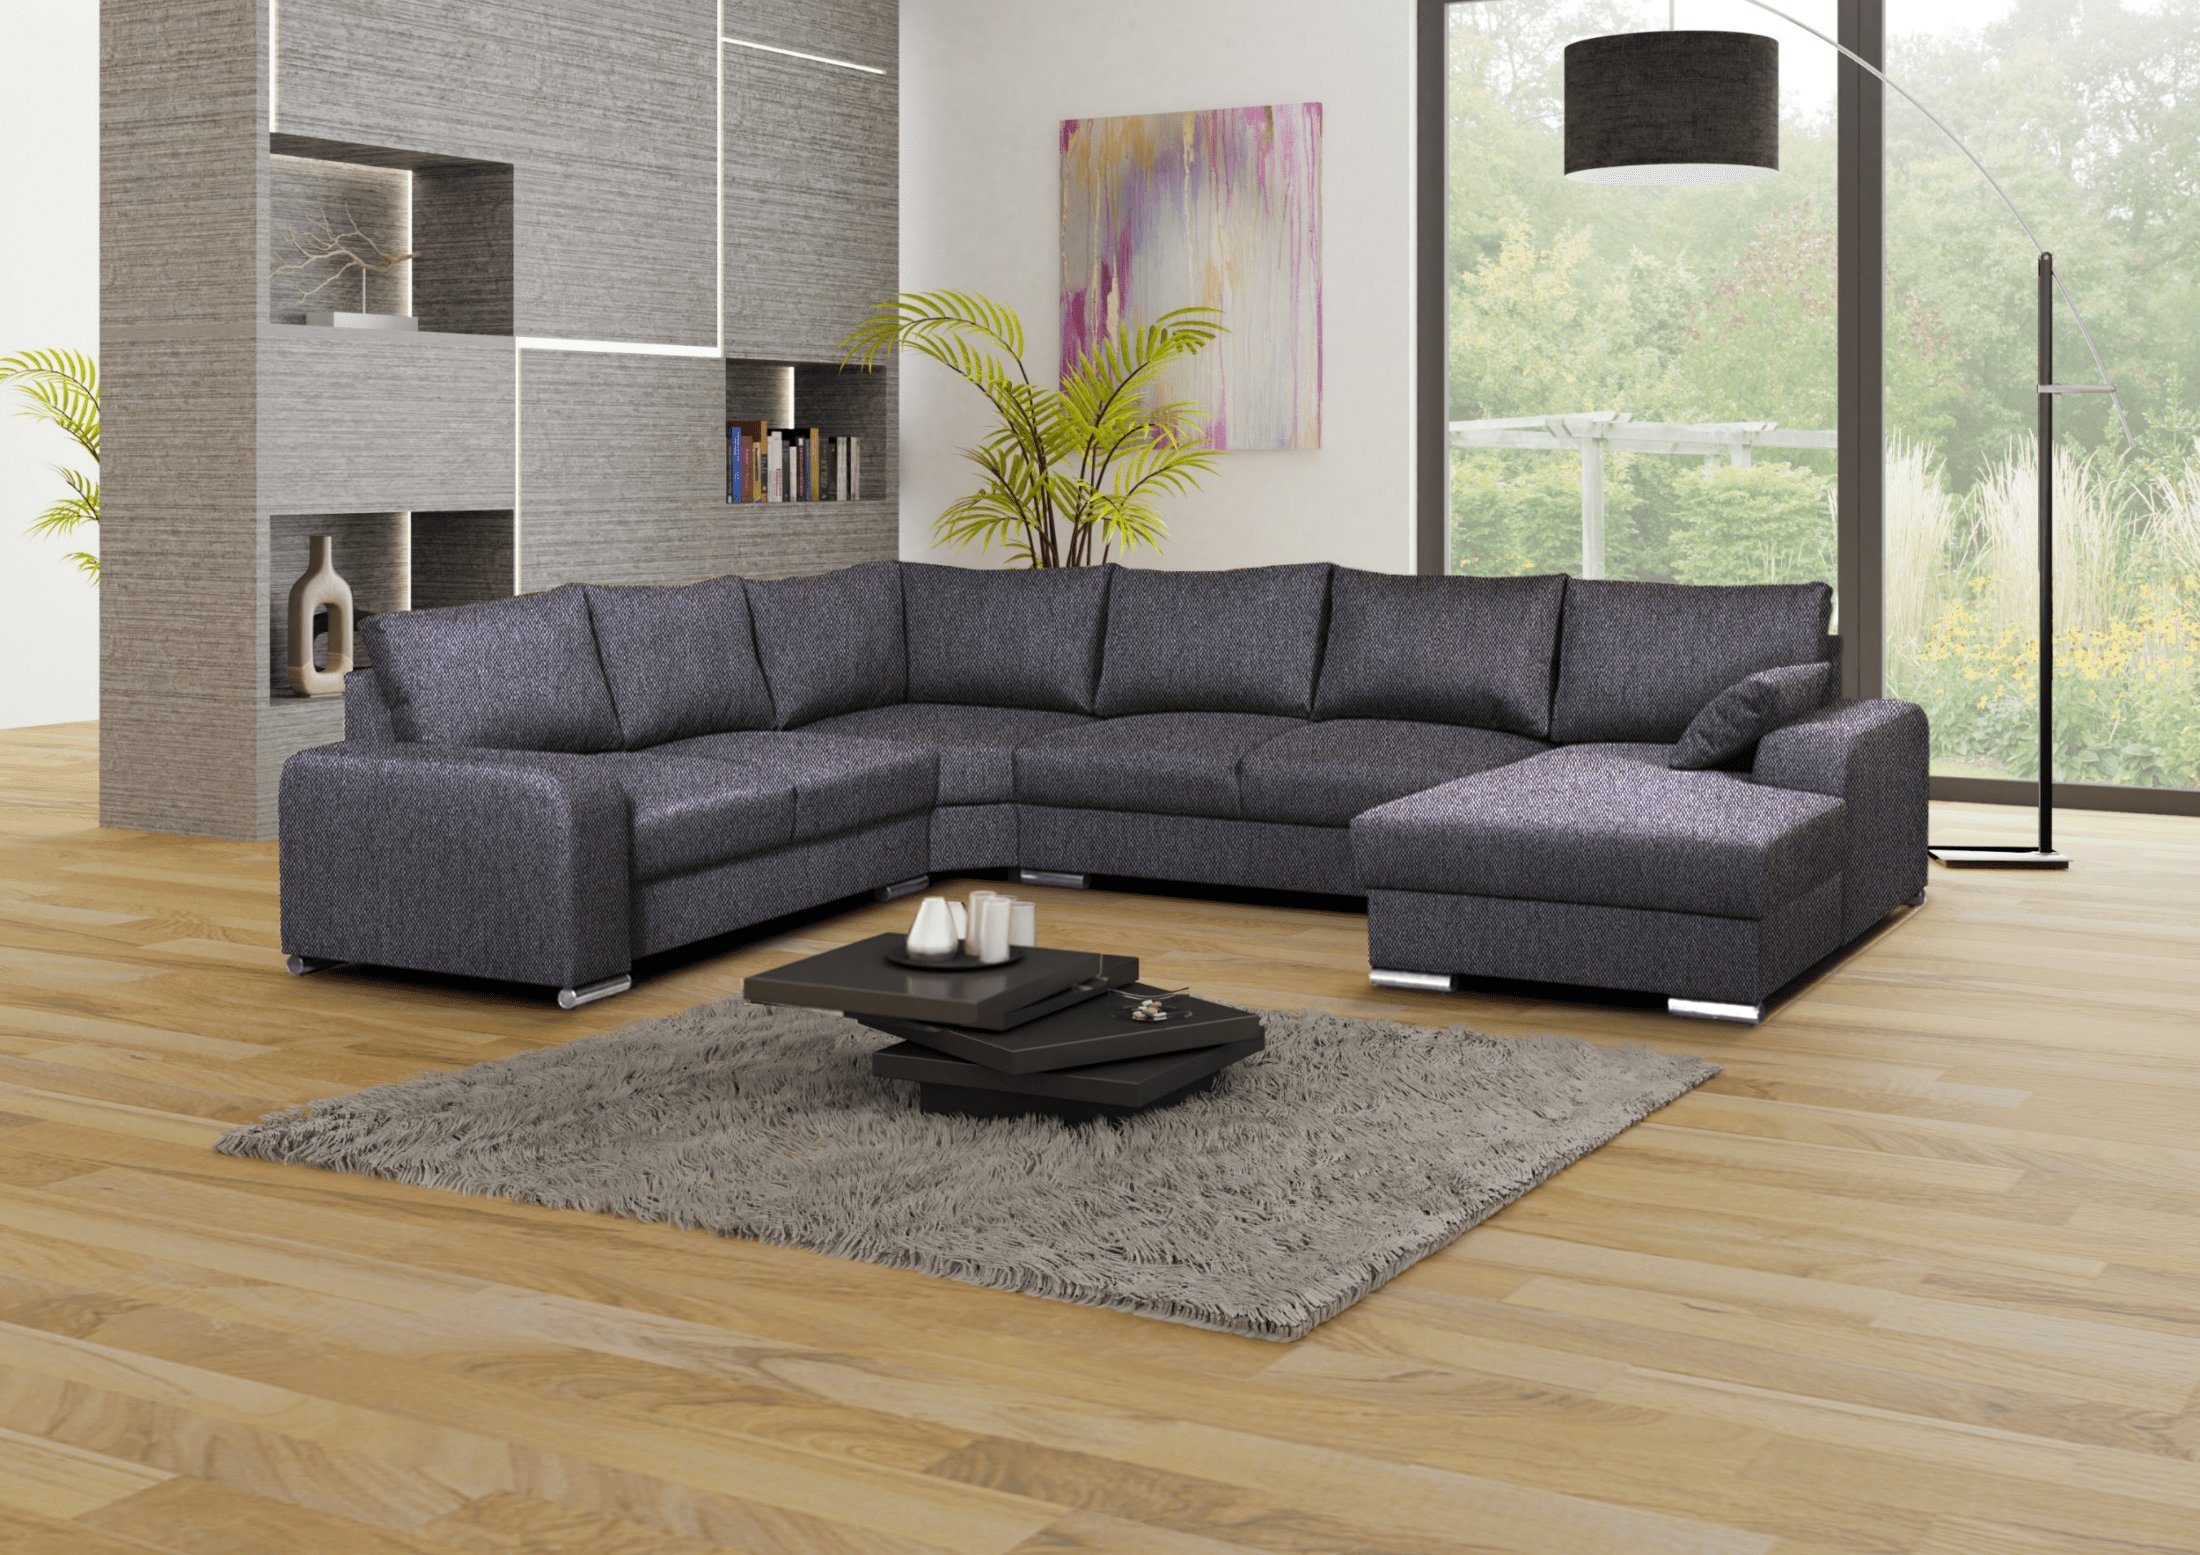 Penther Living Sofa | Alle Sofas